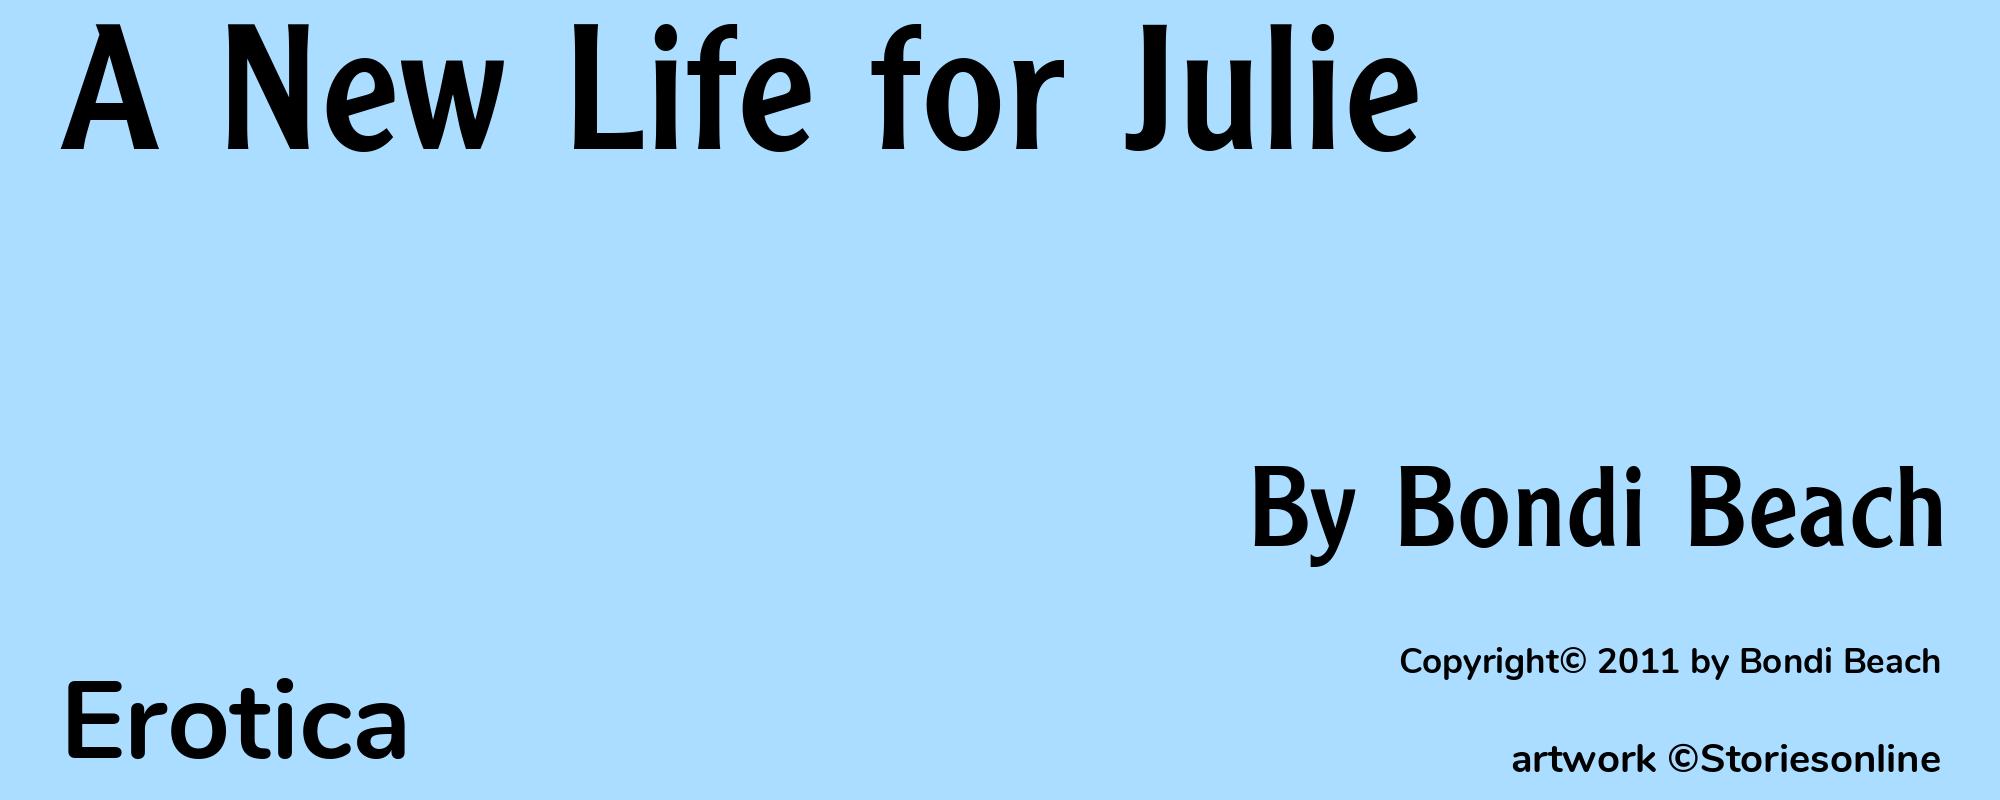 A New Life for Julie - Cover